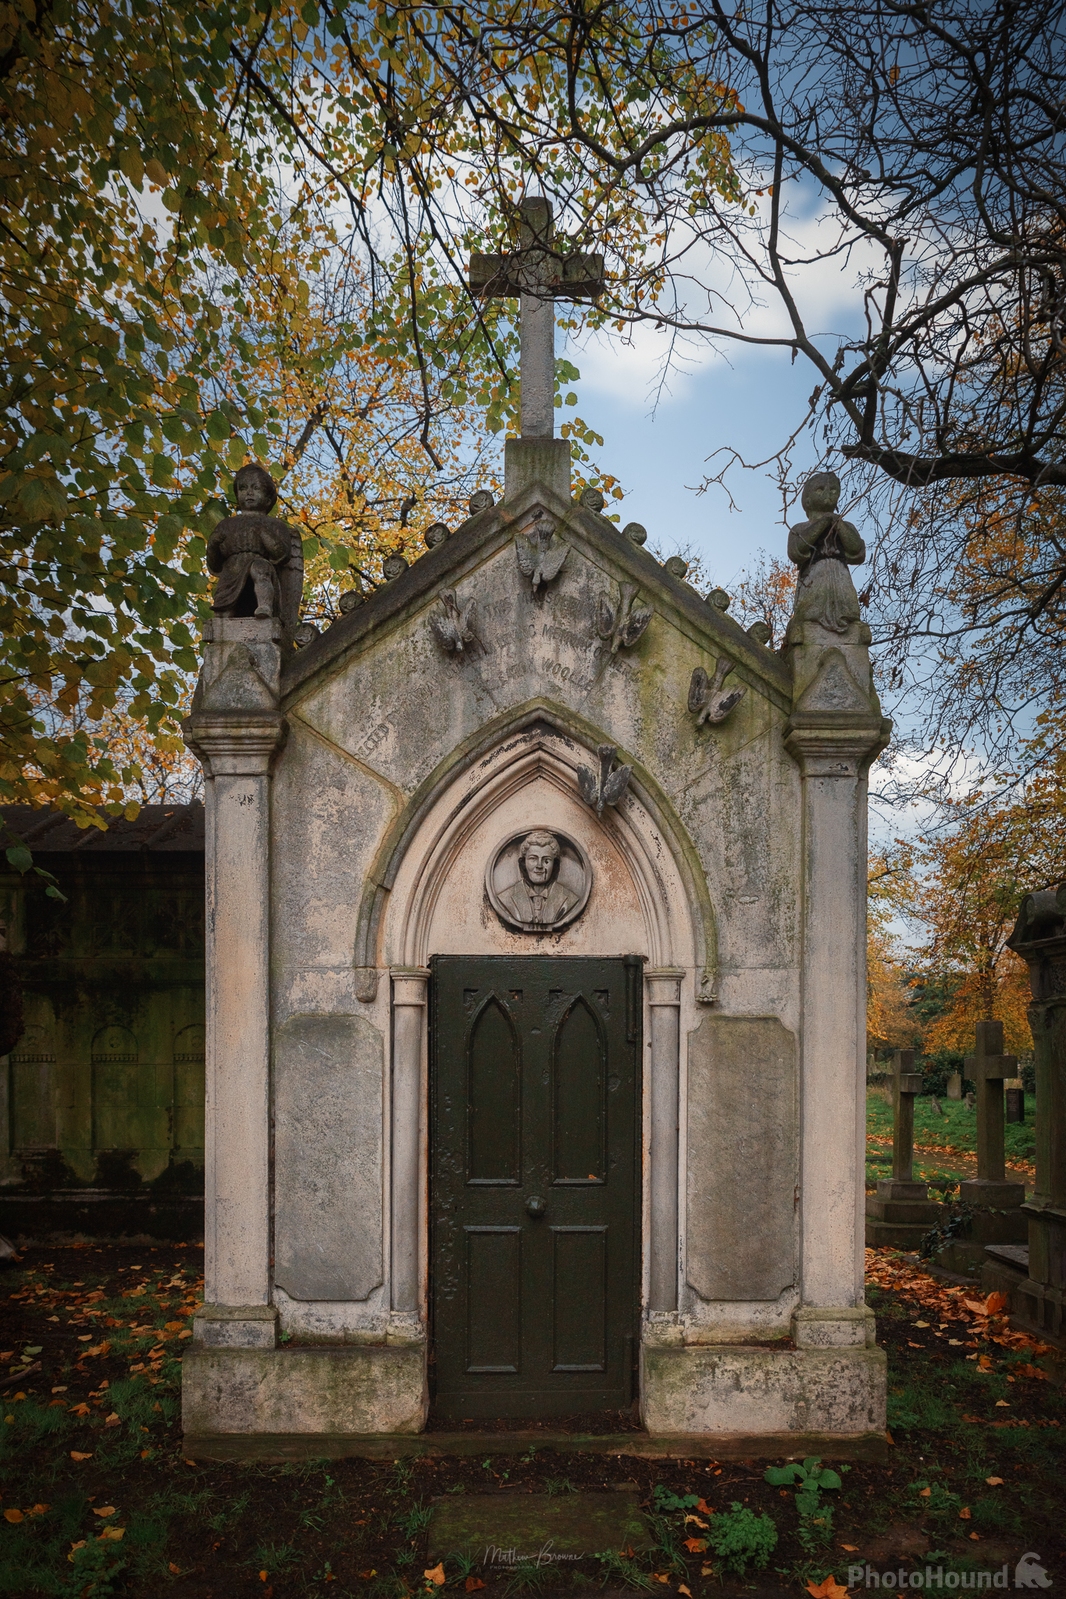 Image of Brompton Cemetery by Mathew Browne